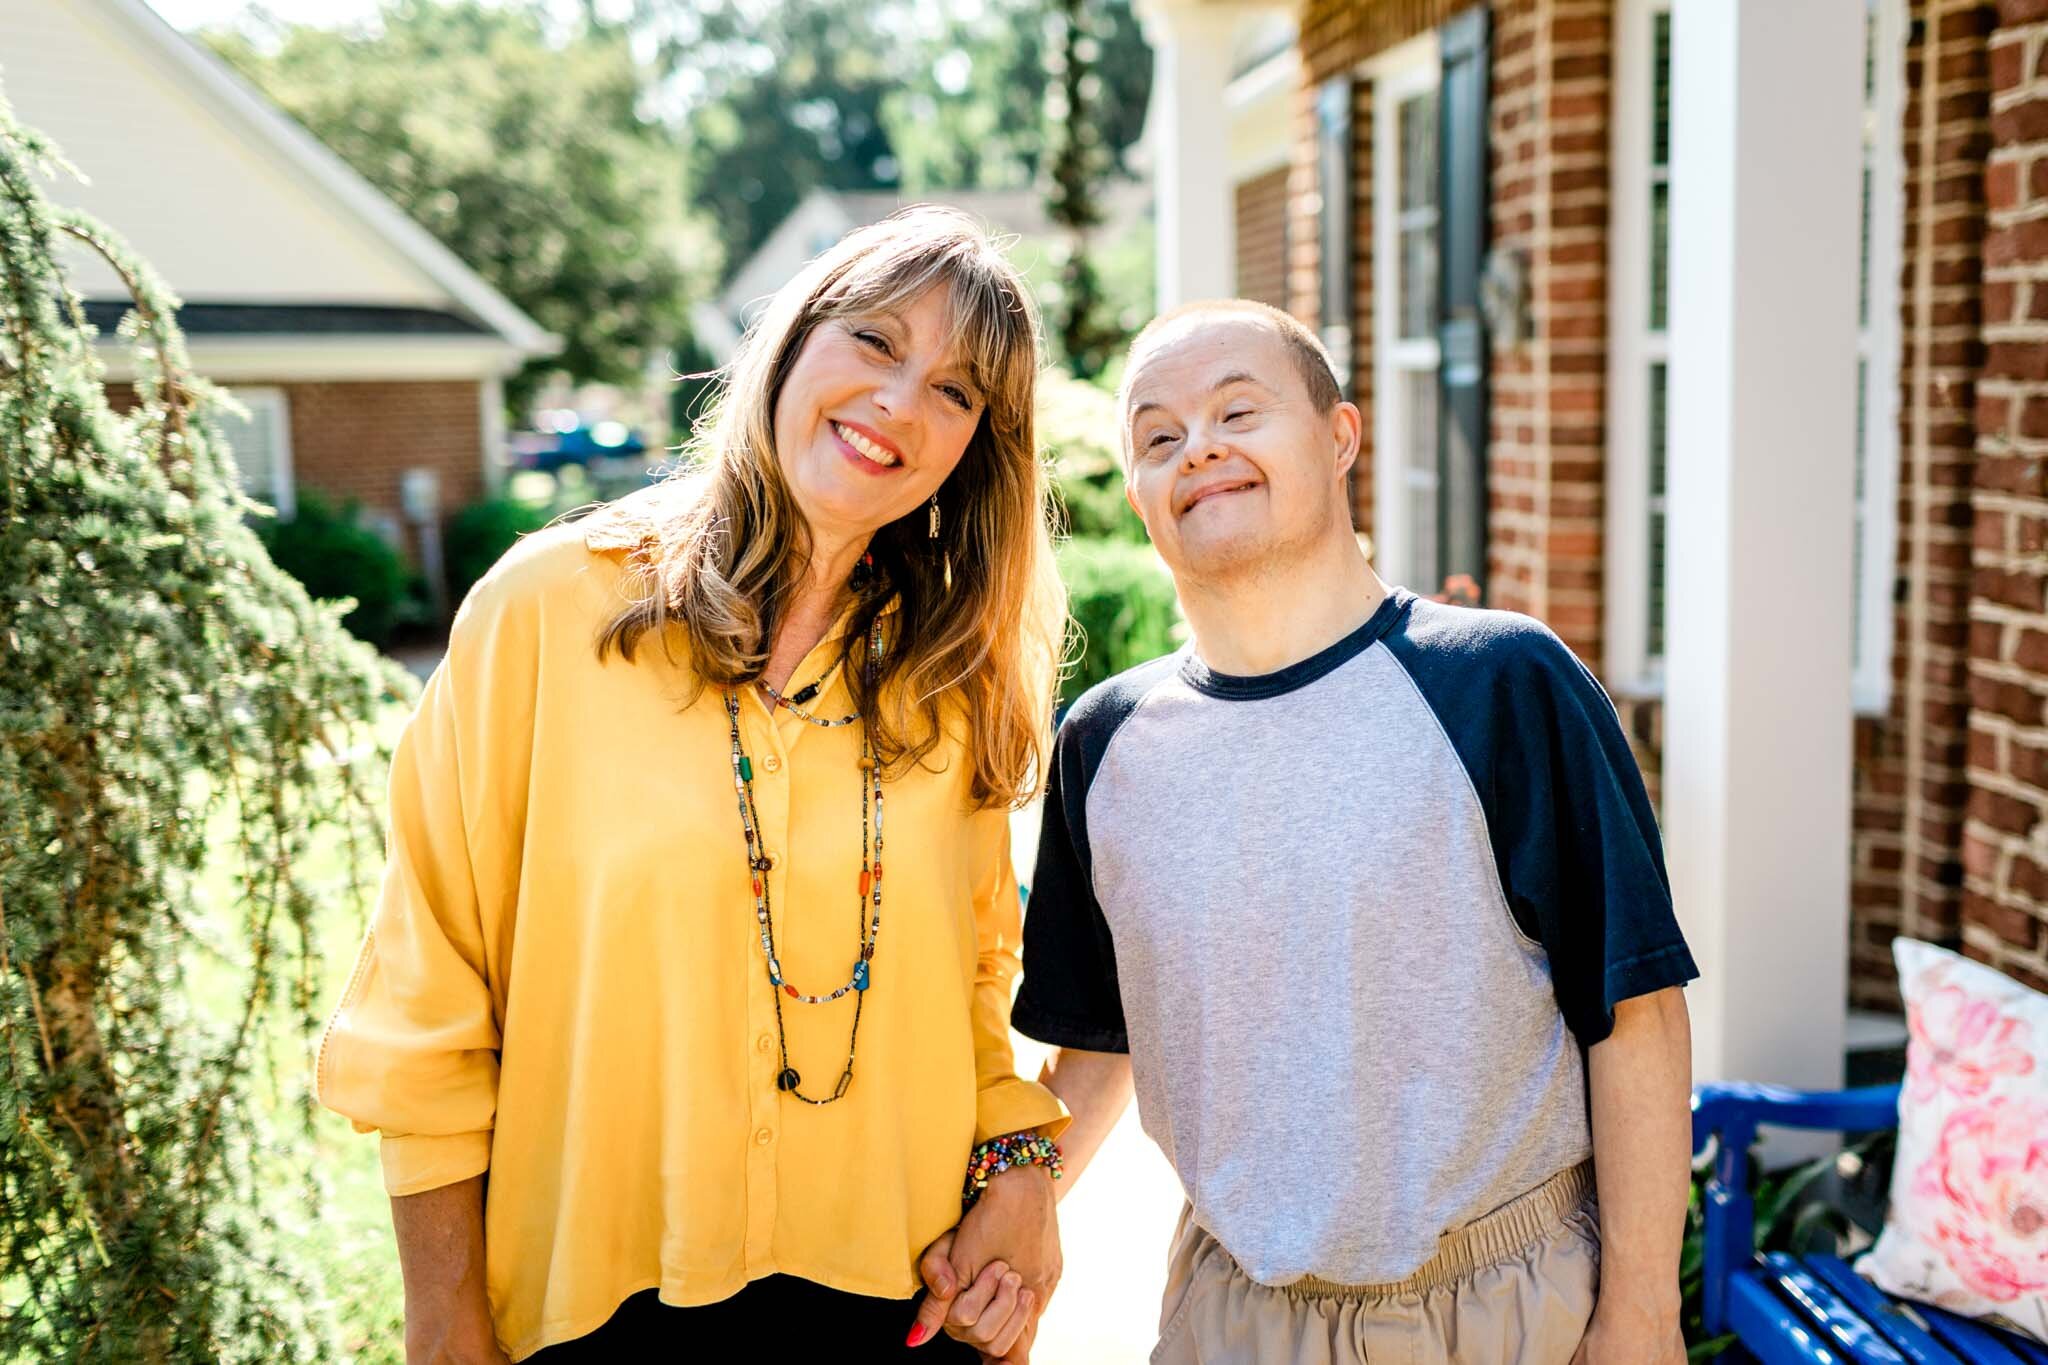 Raleigh Family Photographer | By G. Lin Photography | Outdoor sibling shot of woman and man with down syndrome